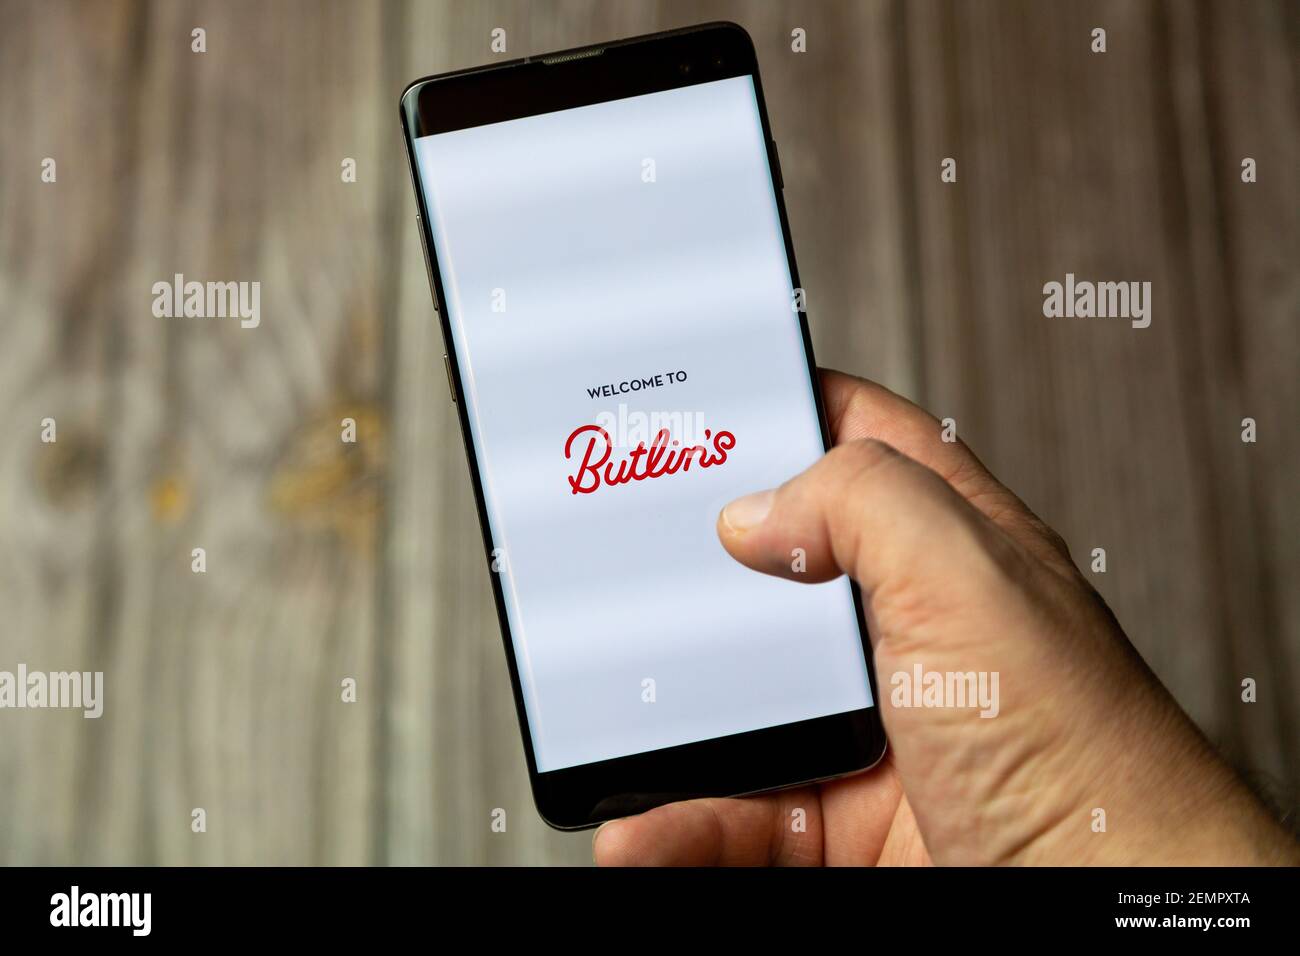 A mobile phone or cell phone being held by a hand with the Butlins holidays app open on screen Stock Photo